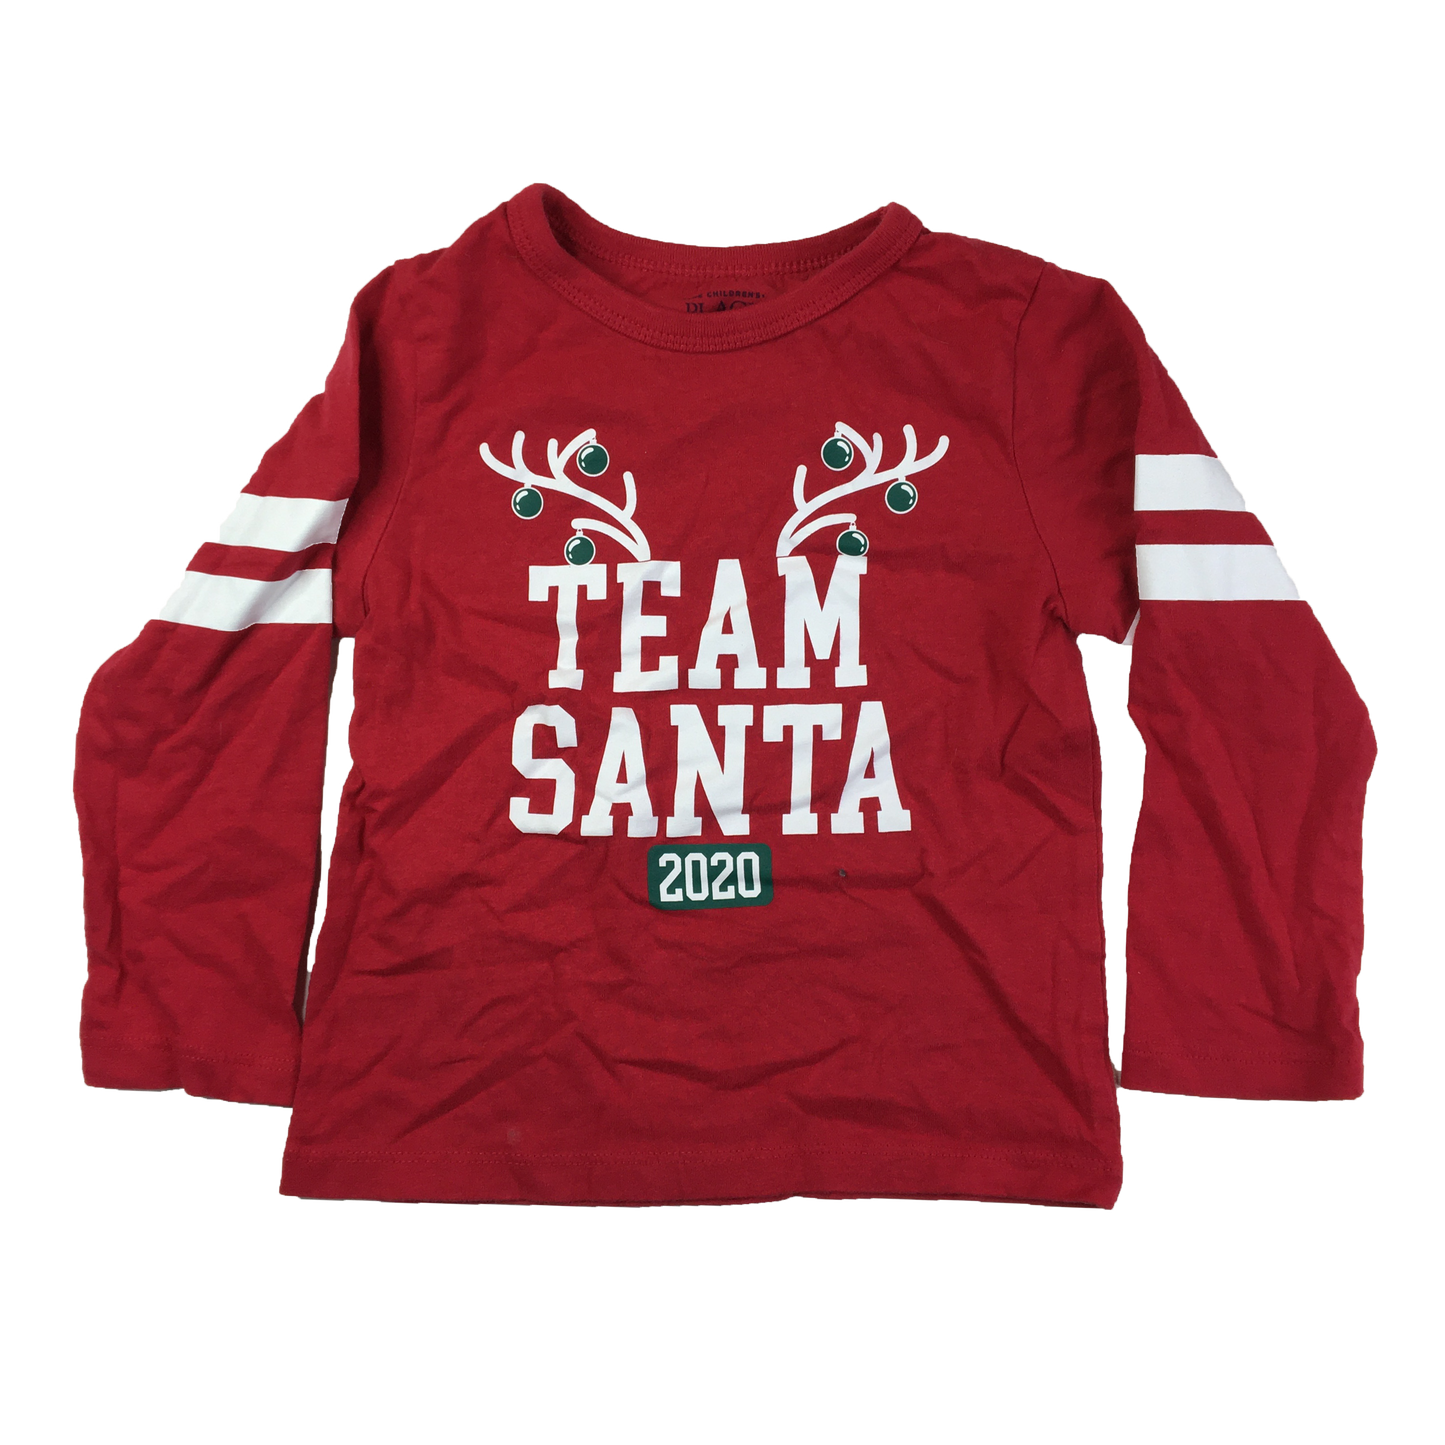 The Children's Place Red Long Sleeve "Team Santa 2020" 2T